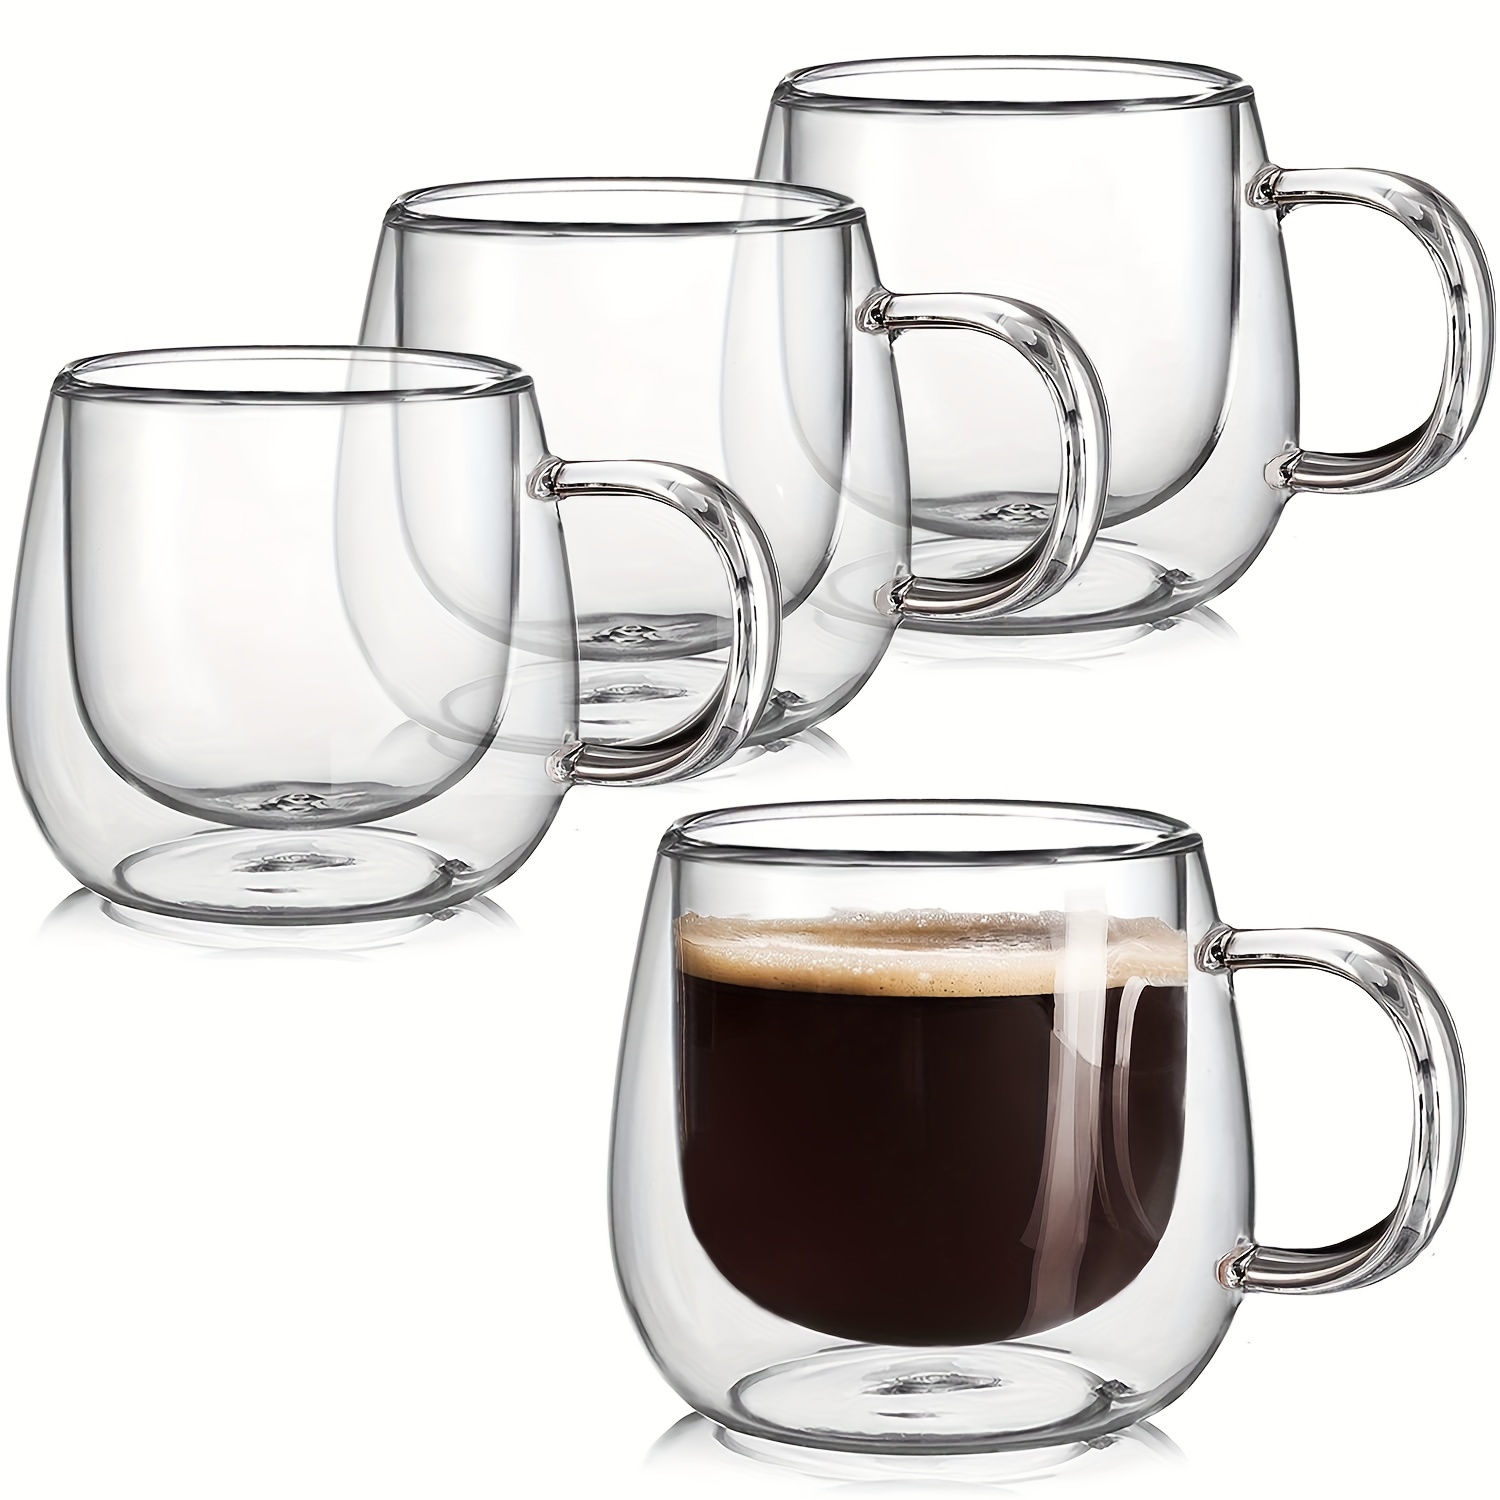 1pc, Expresso Cup, Double-Wall Insulated Glasses Cup Coffee Cup